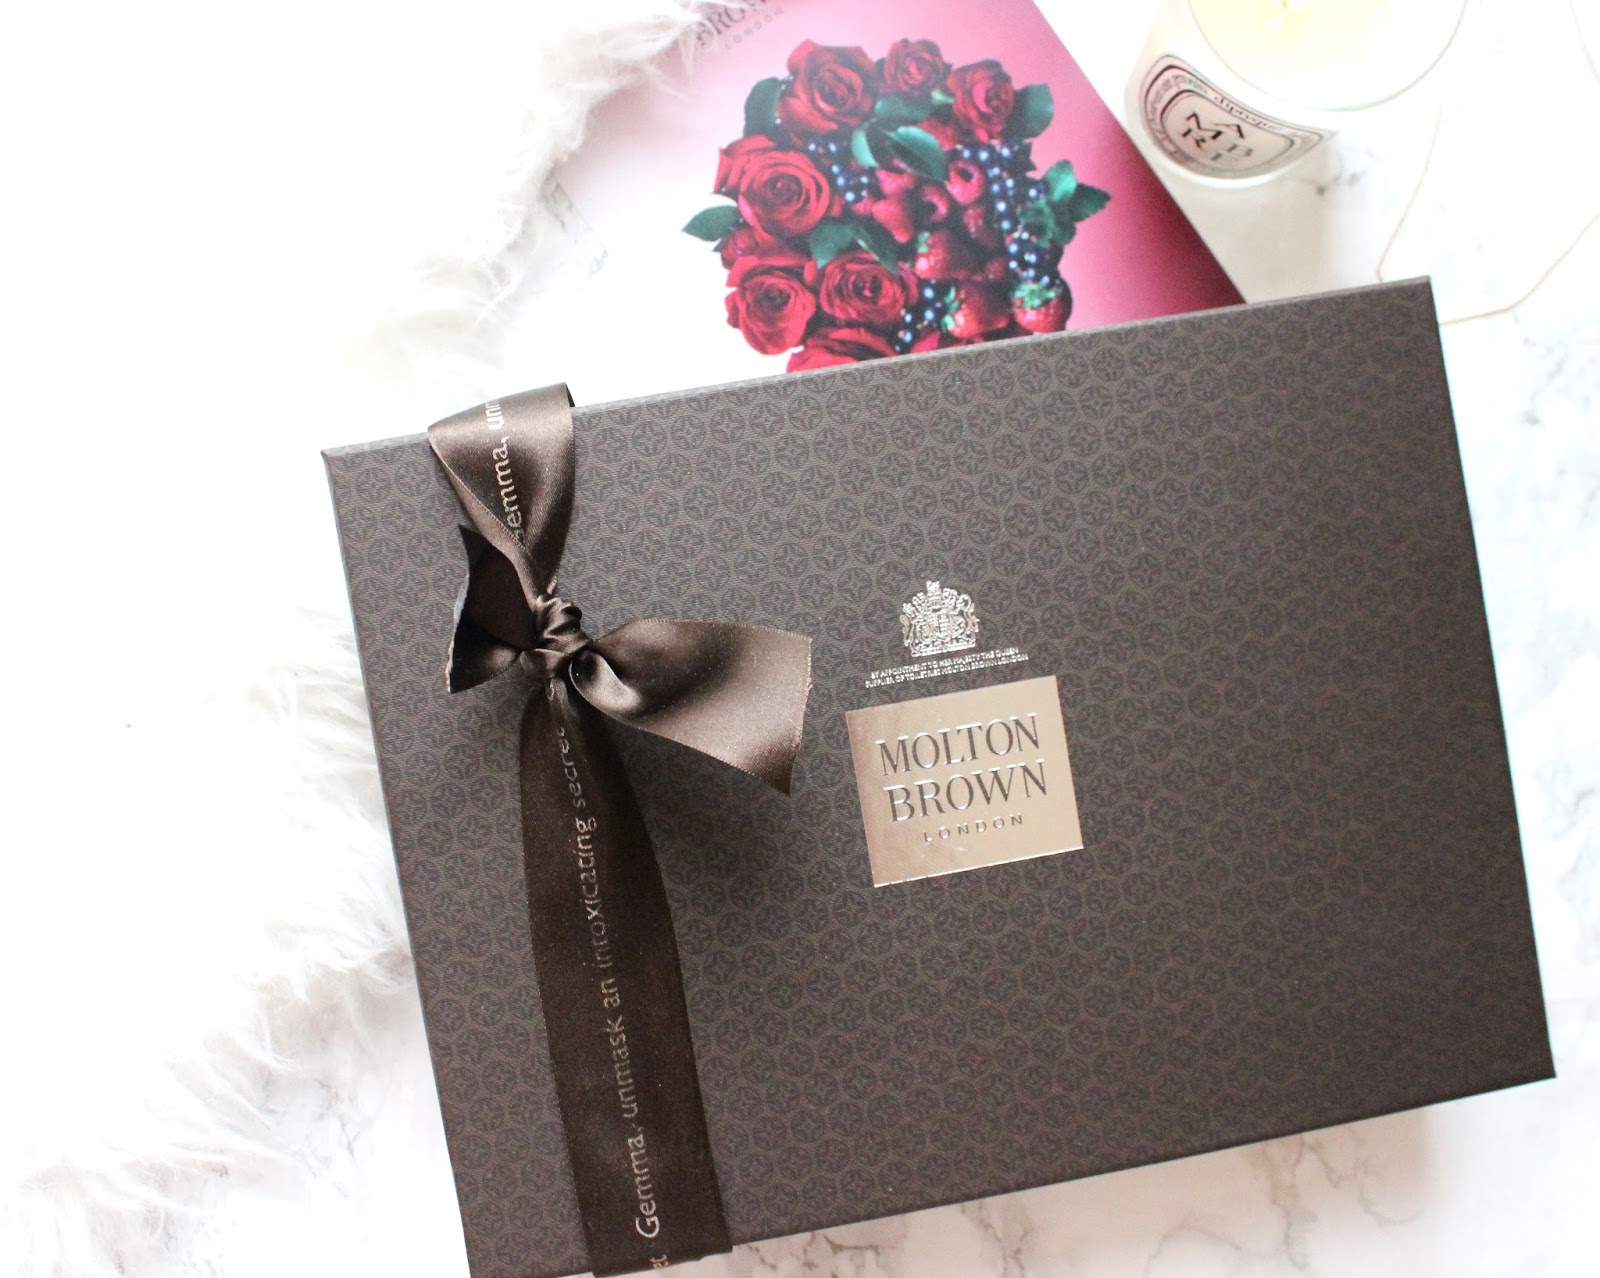 Molton Brown Rose Absolute